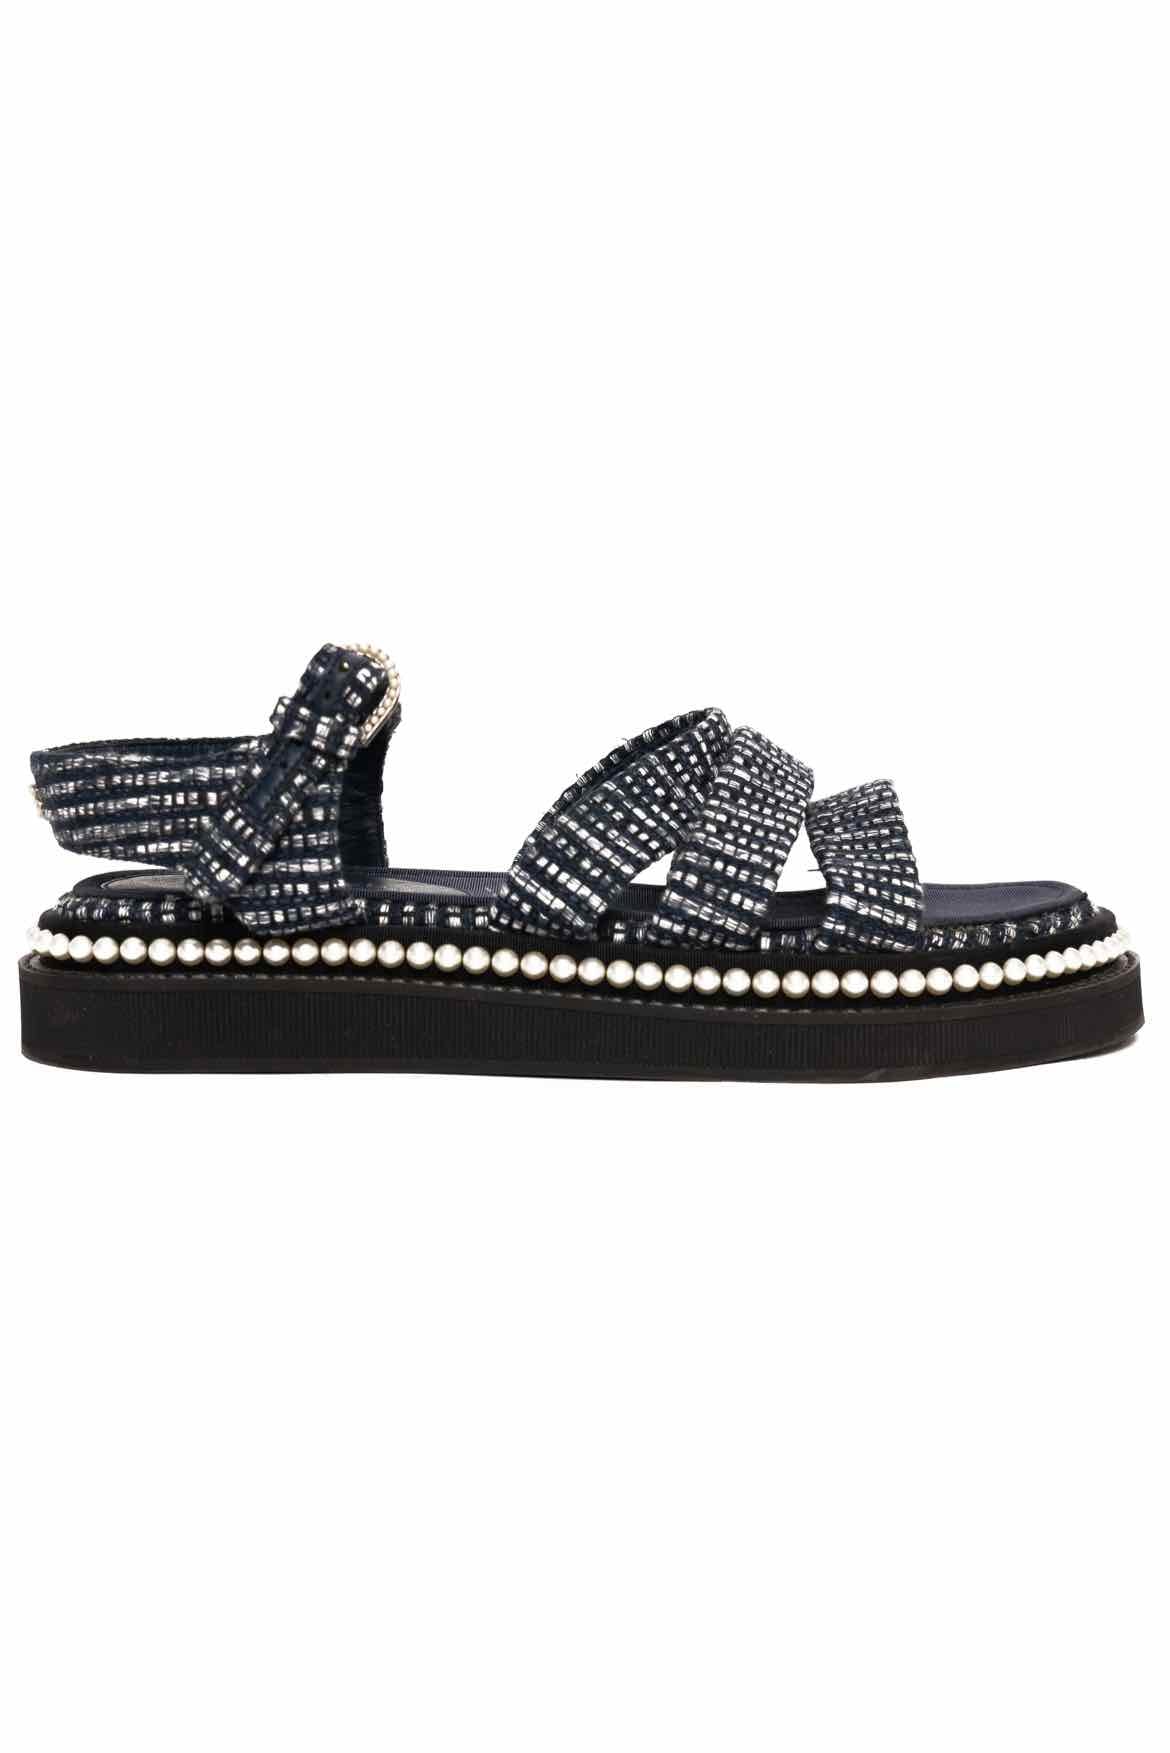 pearl chanel mules 37